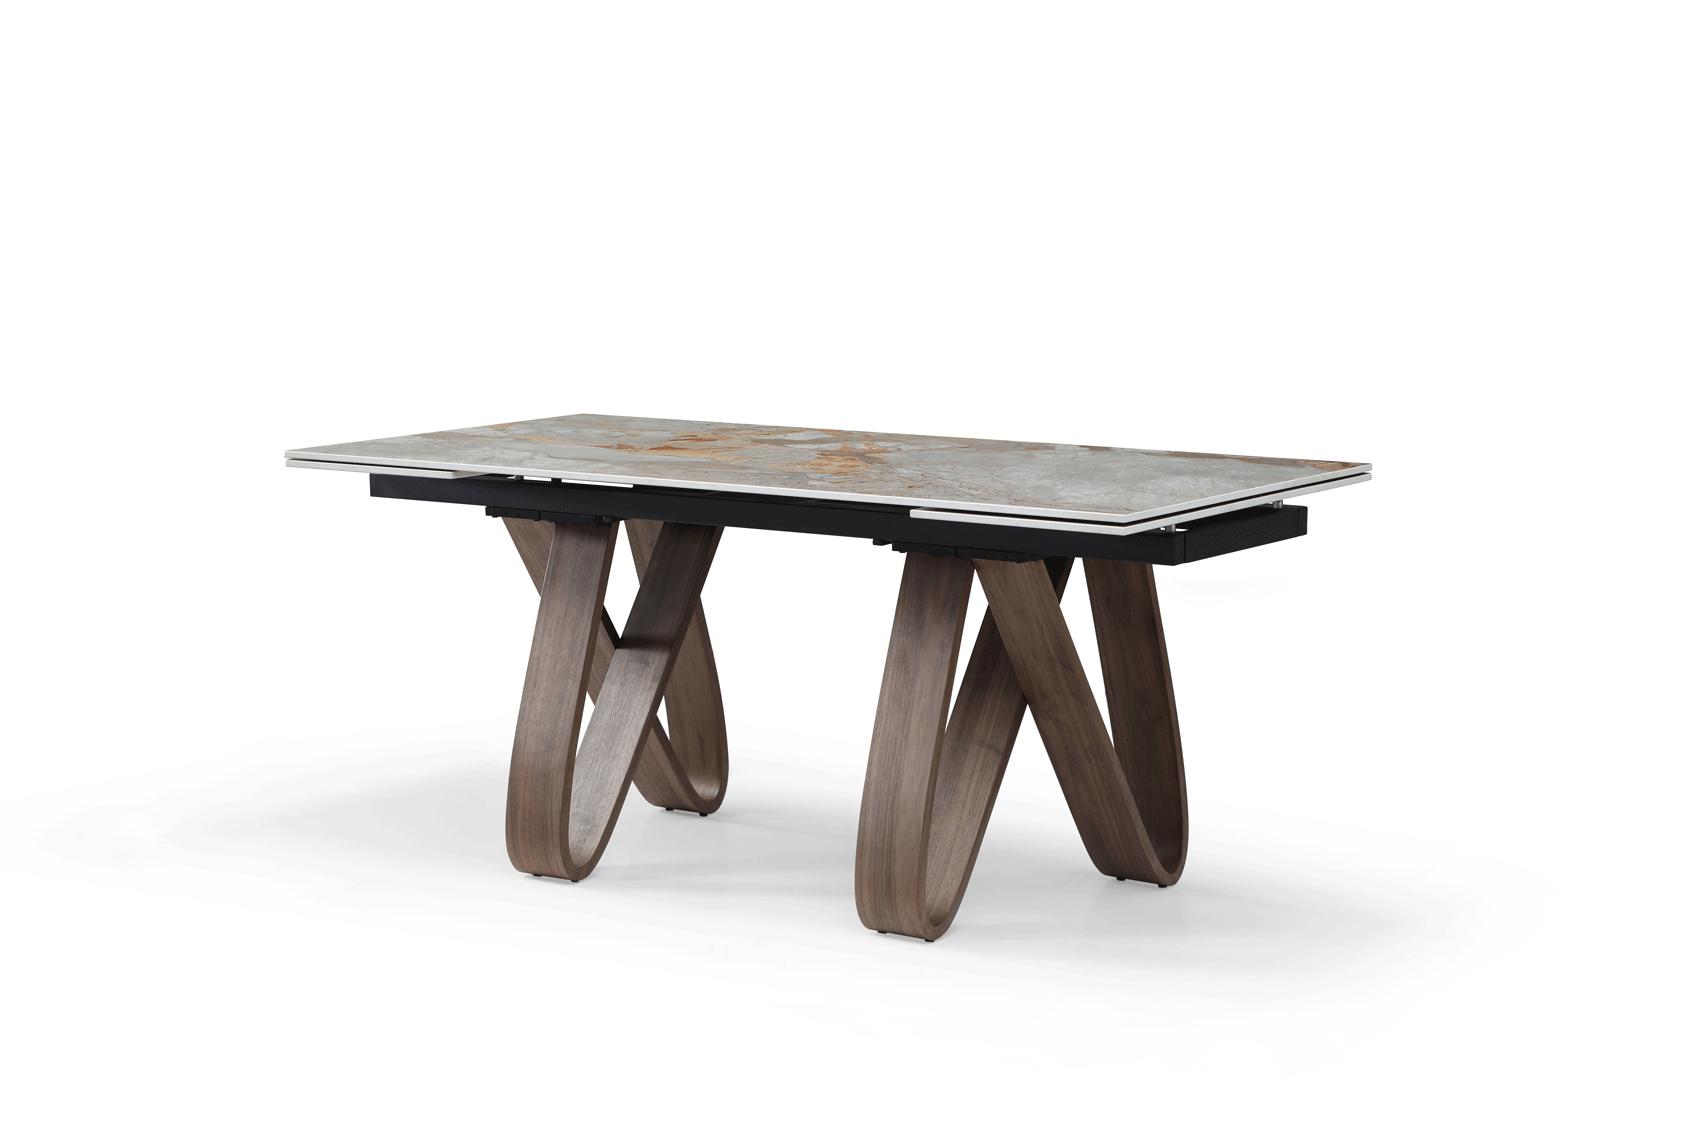 Contemporary Dining Table 9086TABLE 9086TABLE in Walnut, Beige 